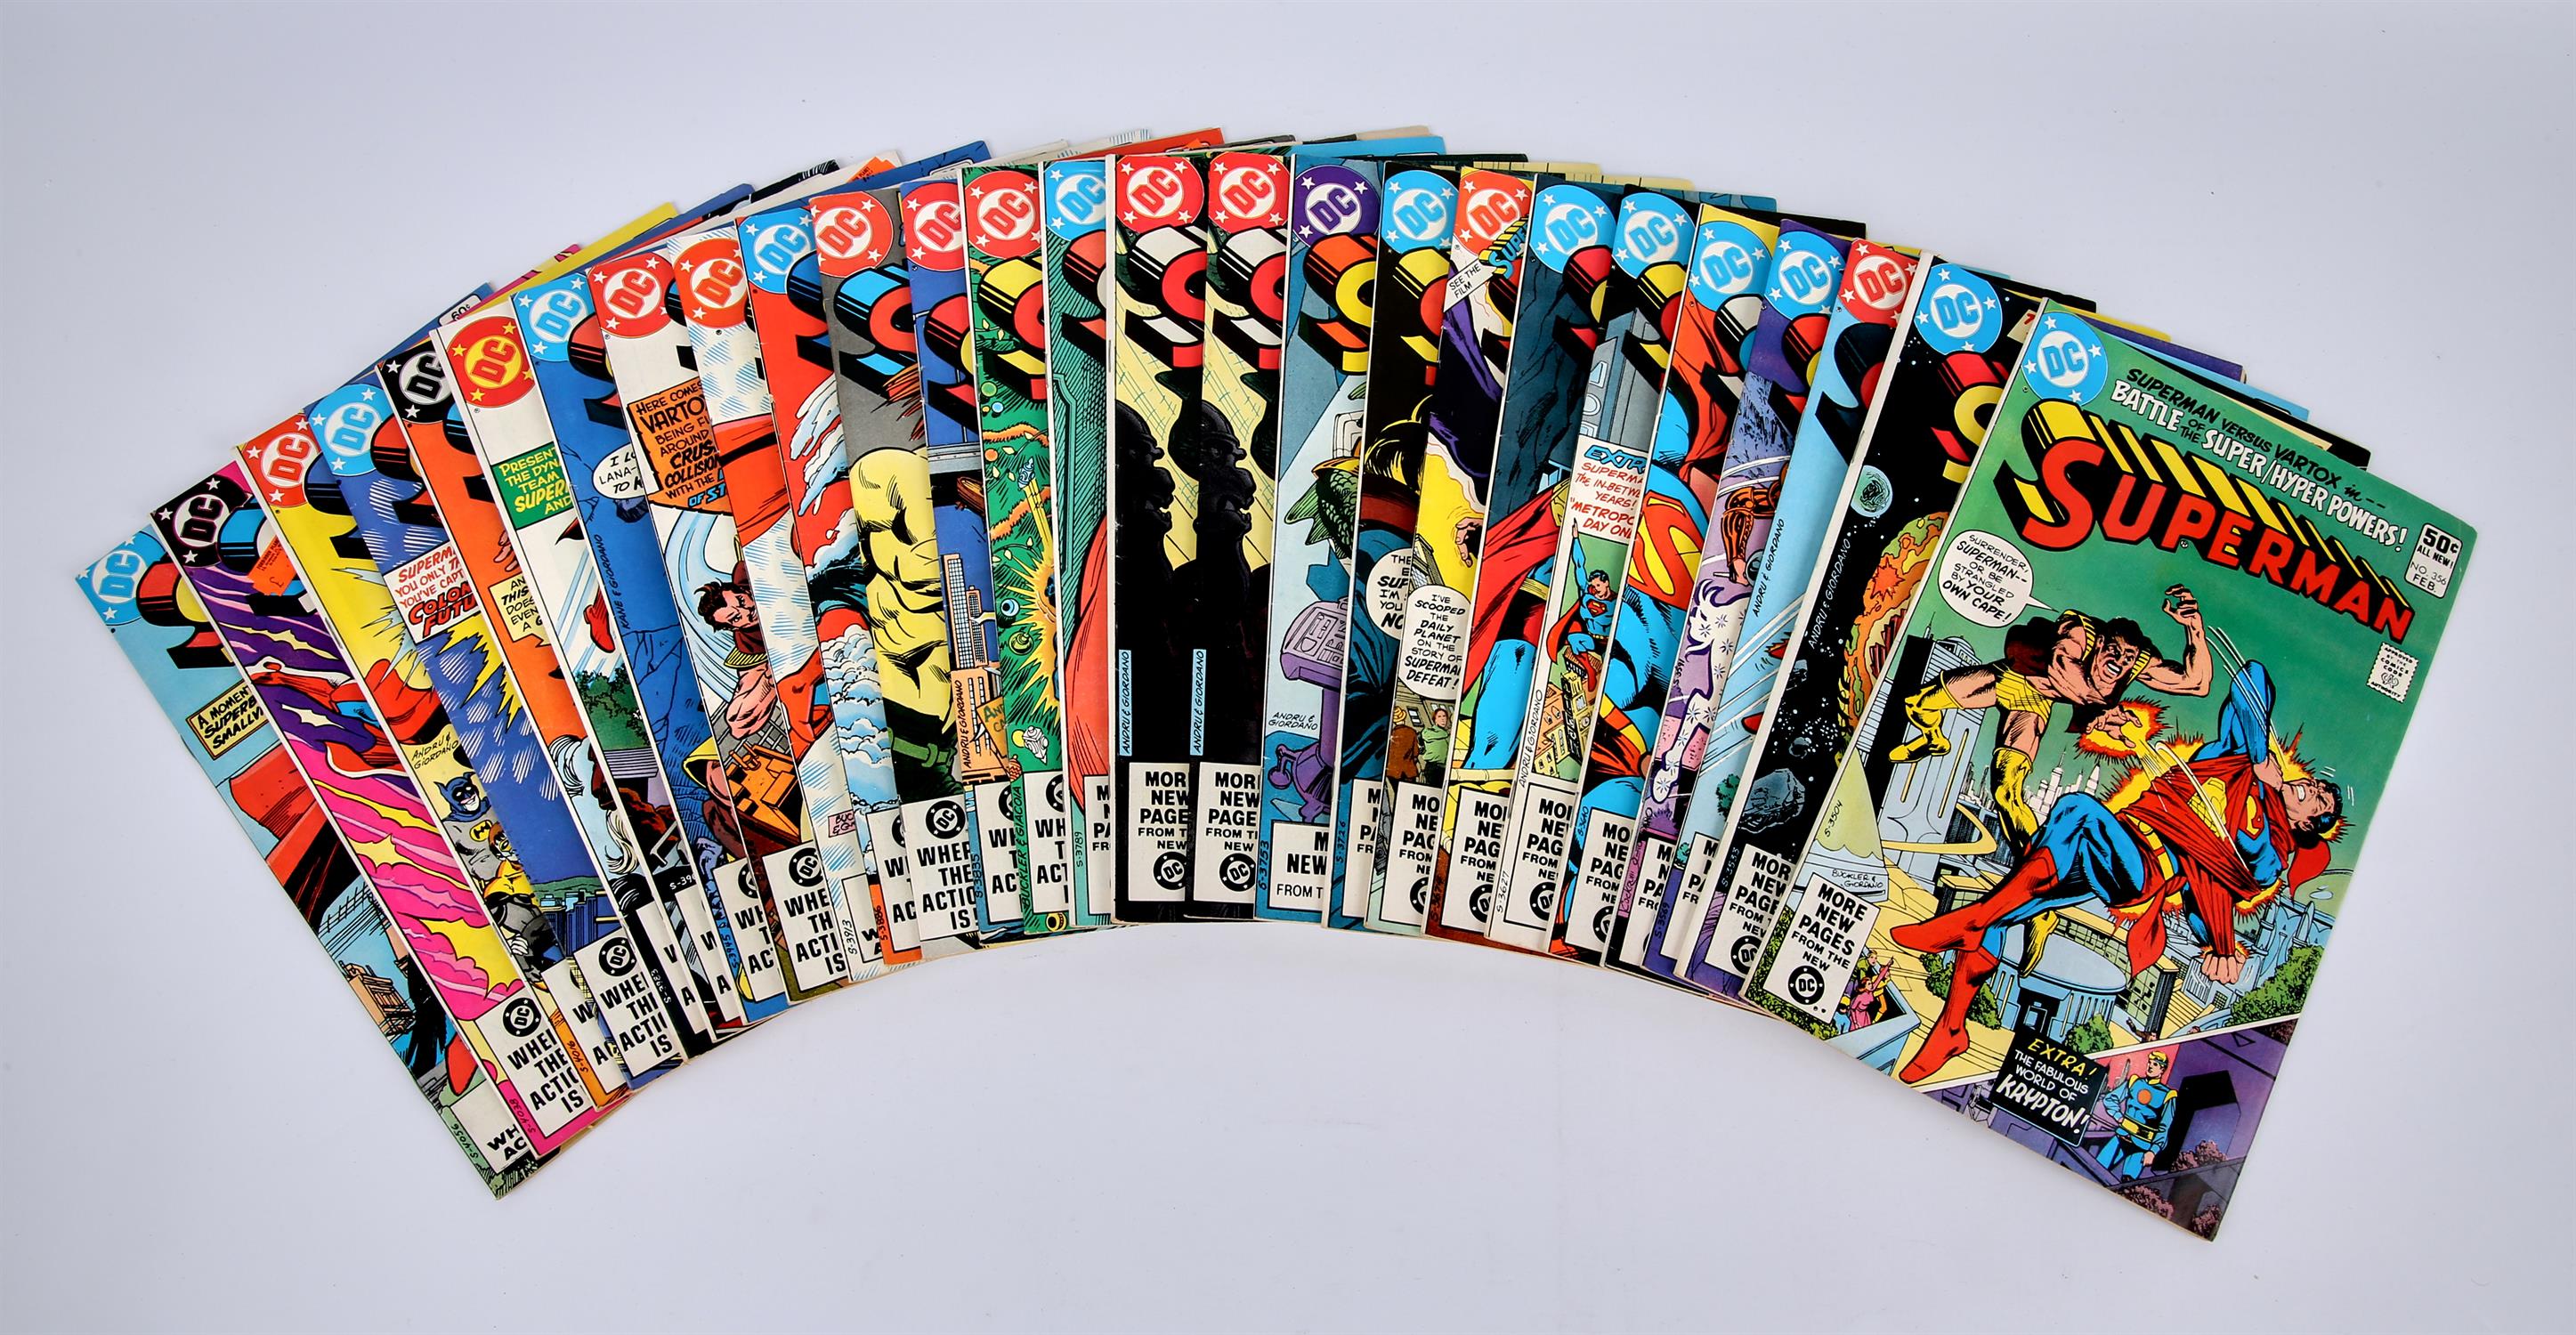 Superman: a large group of 100 approx. comics (DC comics, 1966 onwards). A large group of Superman